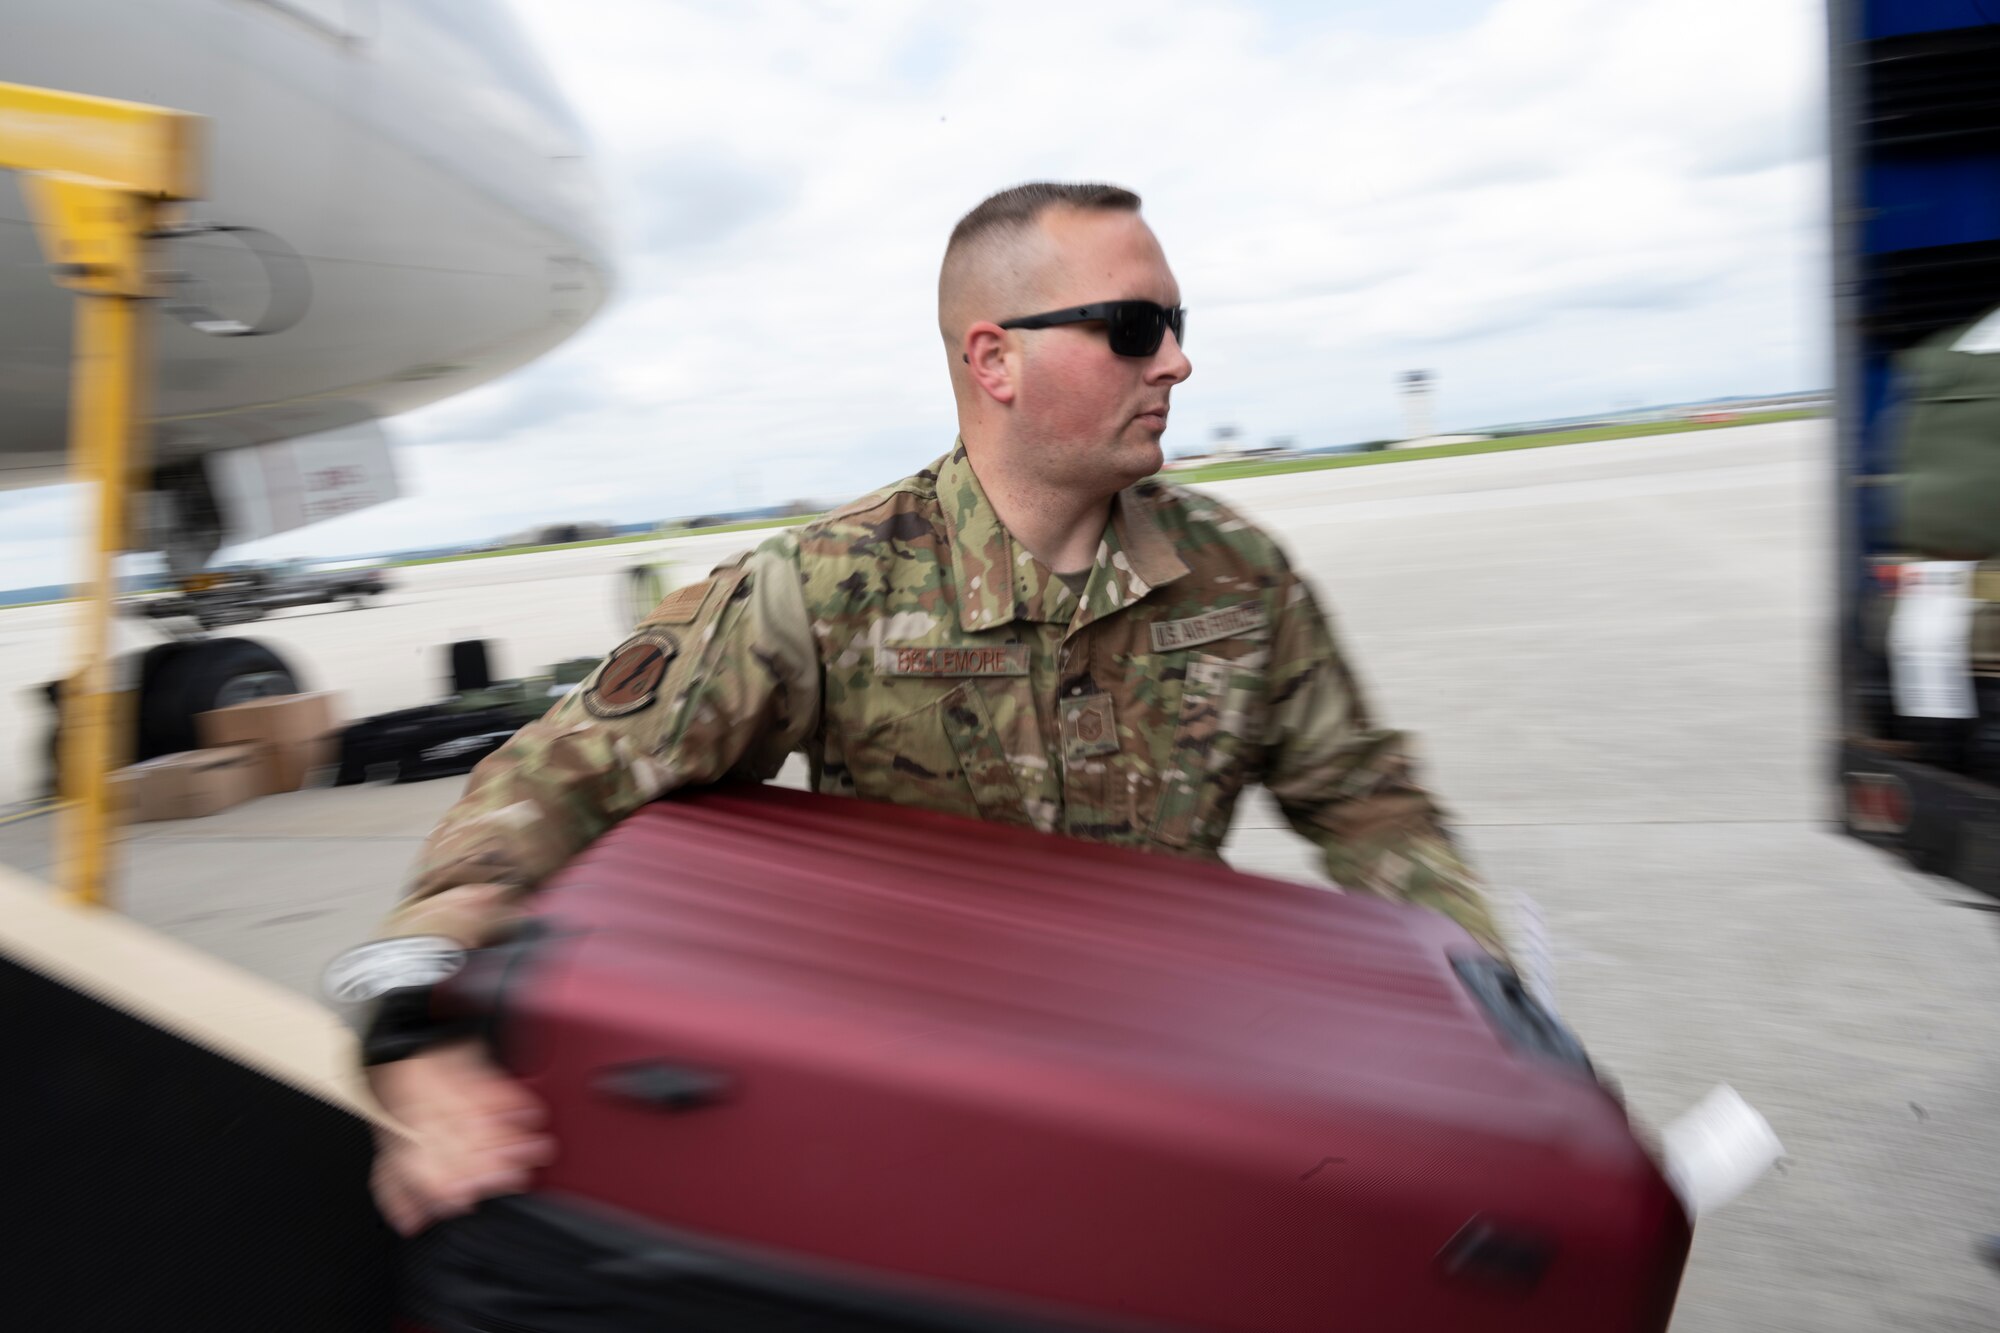 U.S. Air Force Master Sgt. Brett Bellemore, 52nd Logistics Readiness Squadron Air Transportation Function superintendent, offloads luggage from a Patriot Express passenger jet on Spangdahlem Air Base, Germany, Aug. 23, 2021.